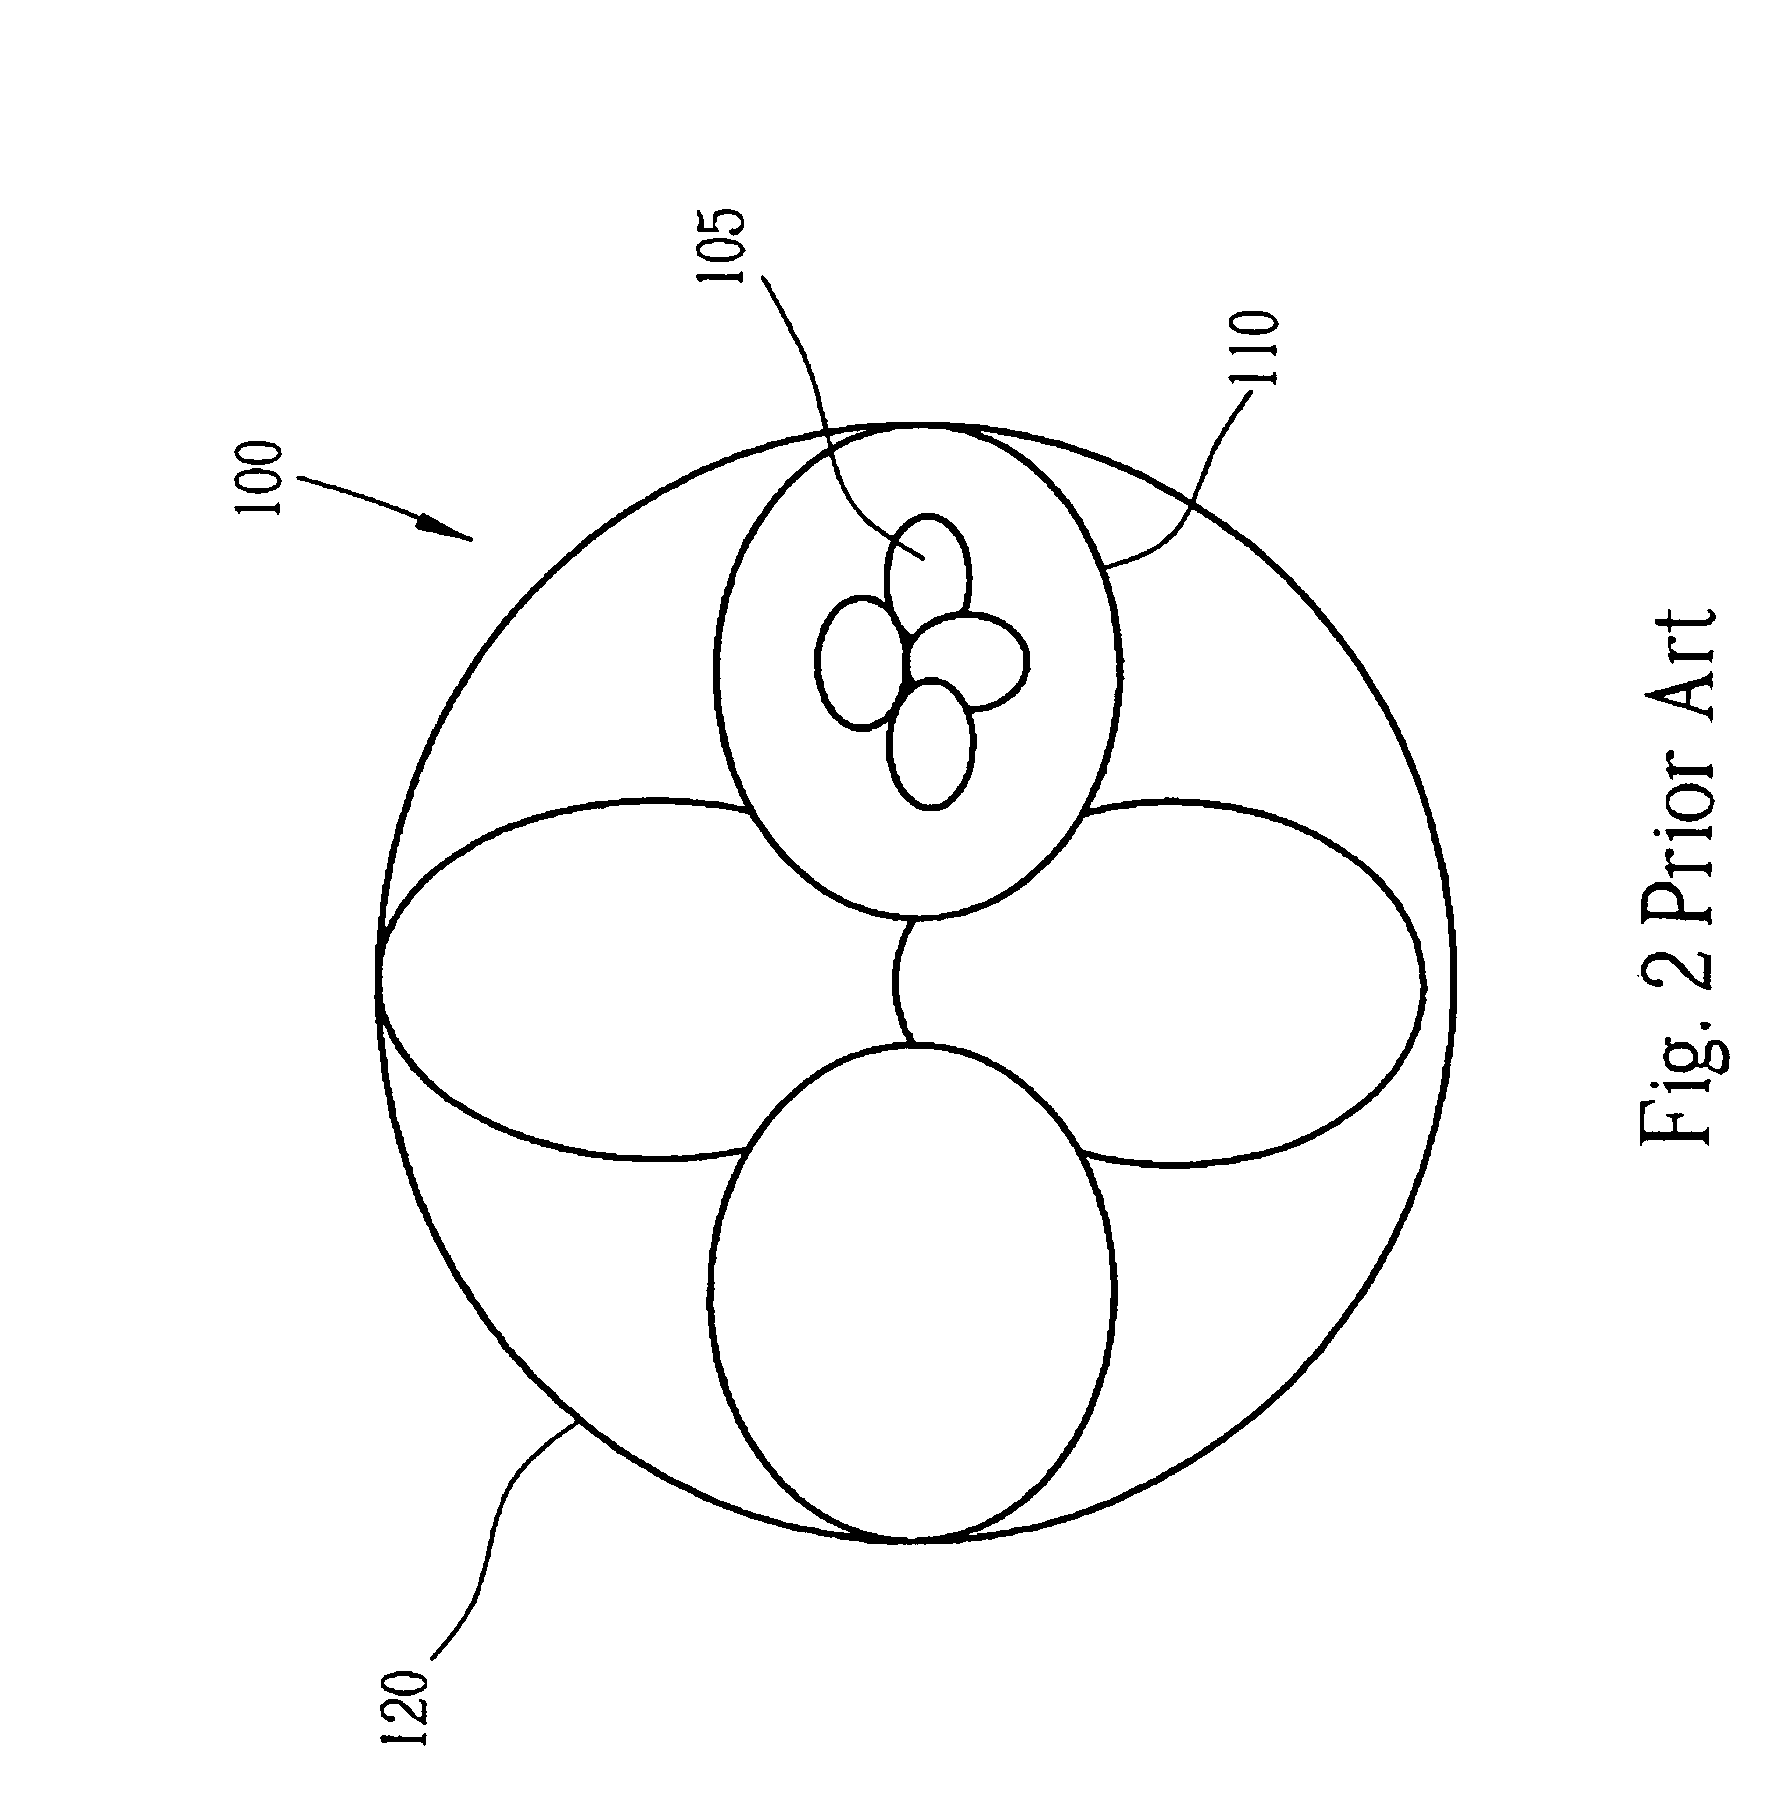 Penalty of cell reselection for a wireless device